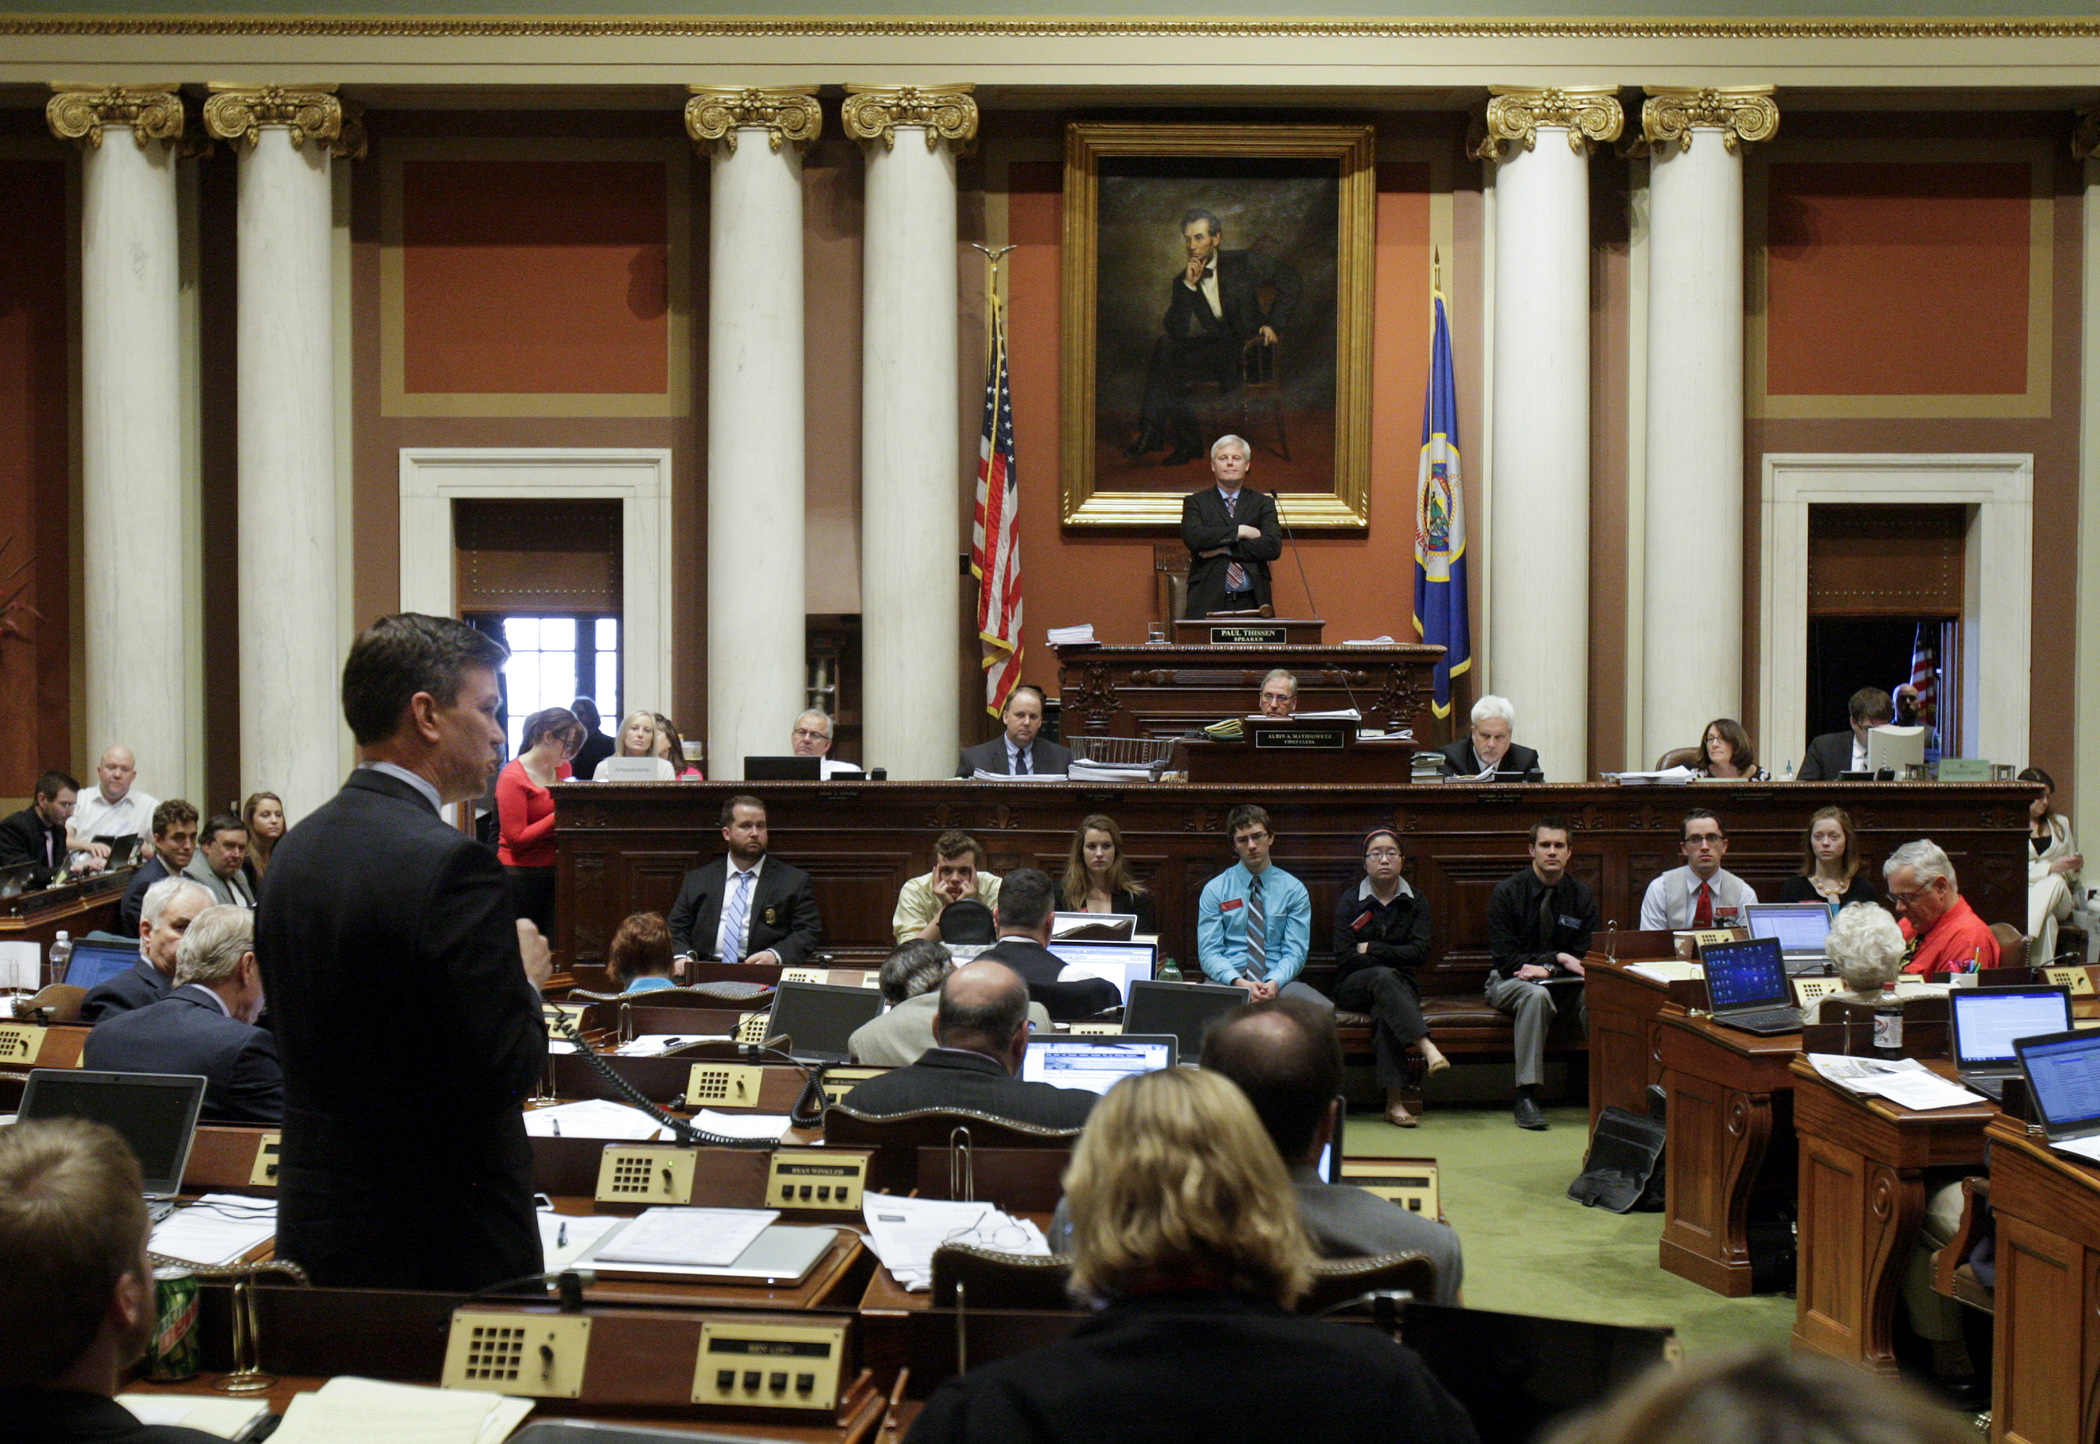 Rep. Ryan Winkler makes his closing comments April 10 before the House takes a vote on a bill to increase the state’s minimum wage. The bill passed 71-60 and now goes to the governor for action. Photo by Paul Battaglia